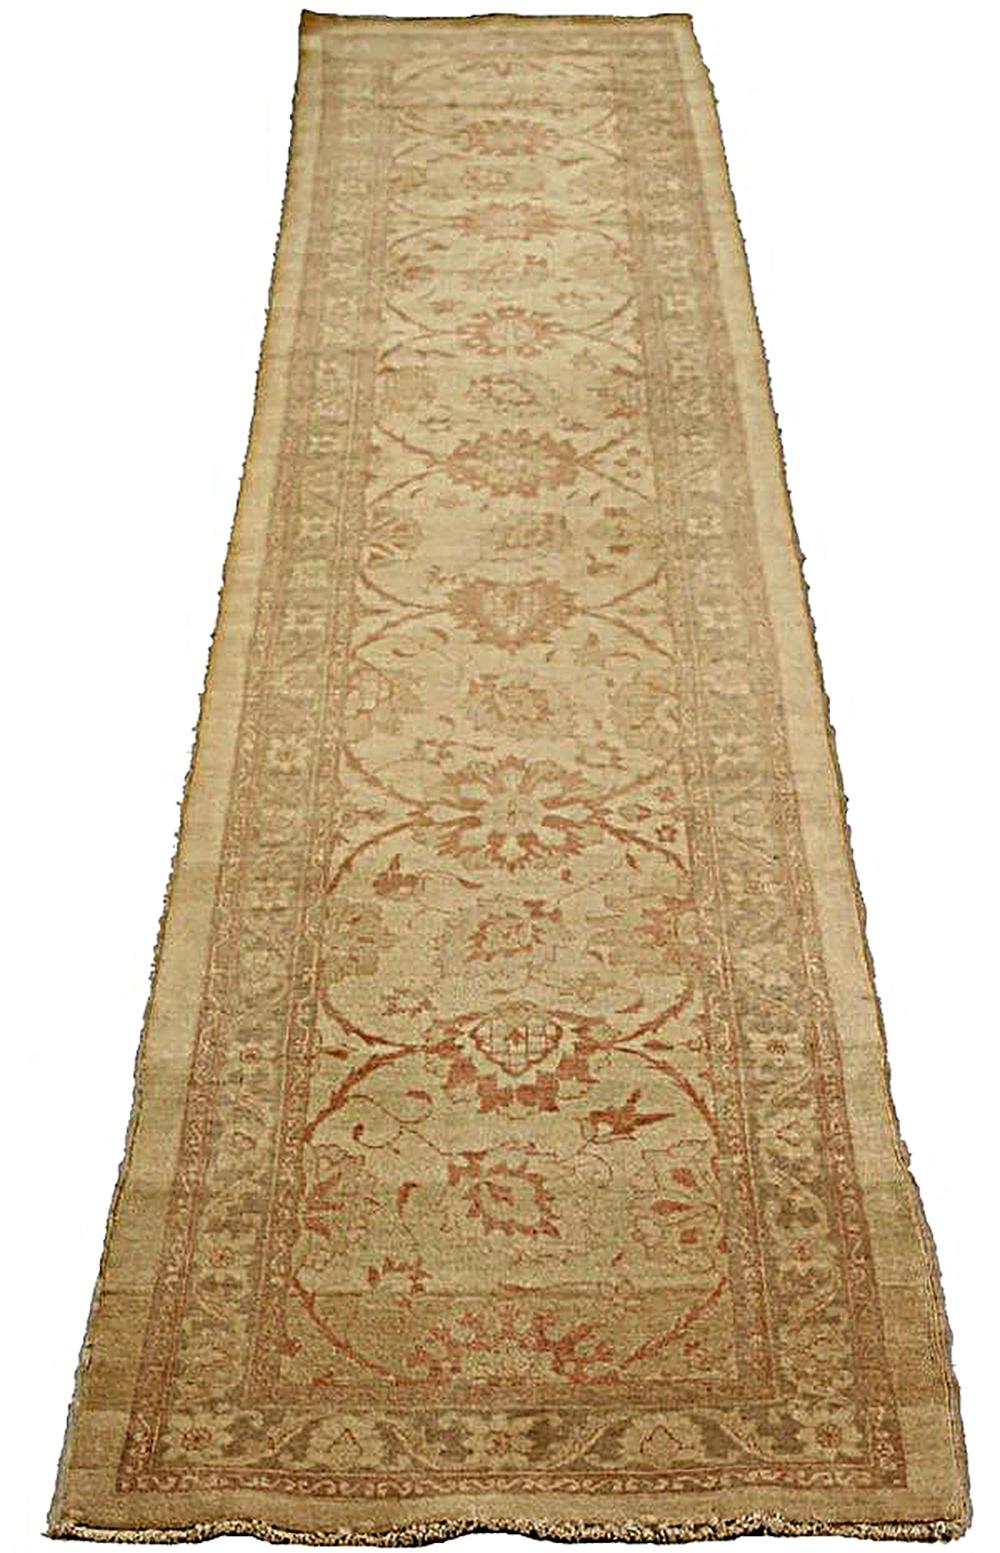 Antique Persian rug handwoven from the finest sheep’s wool and colored with all-natural vegetable dyes that are safe for humans and pets. It’s a traditional Tabriz weaving featuring a lovely ensemble of floral designs in beige and brown. It’s a